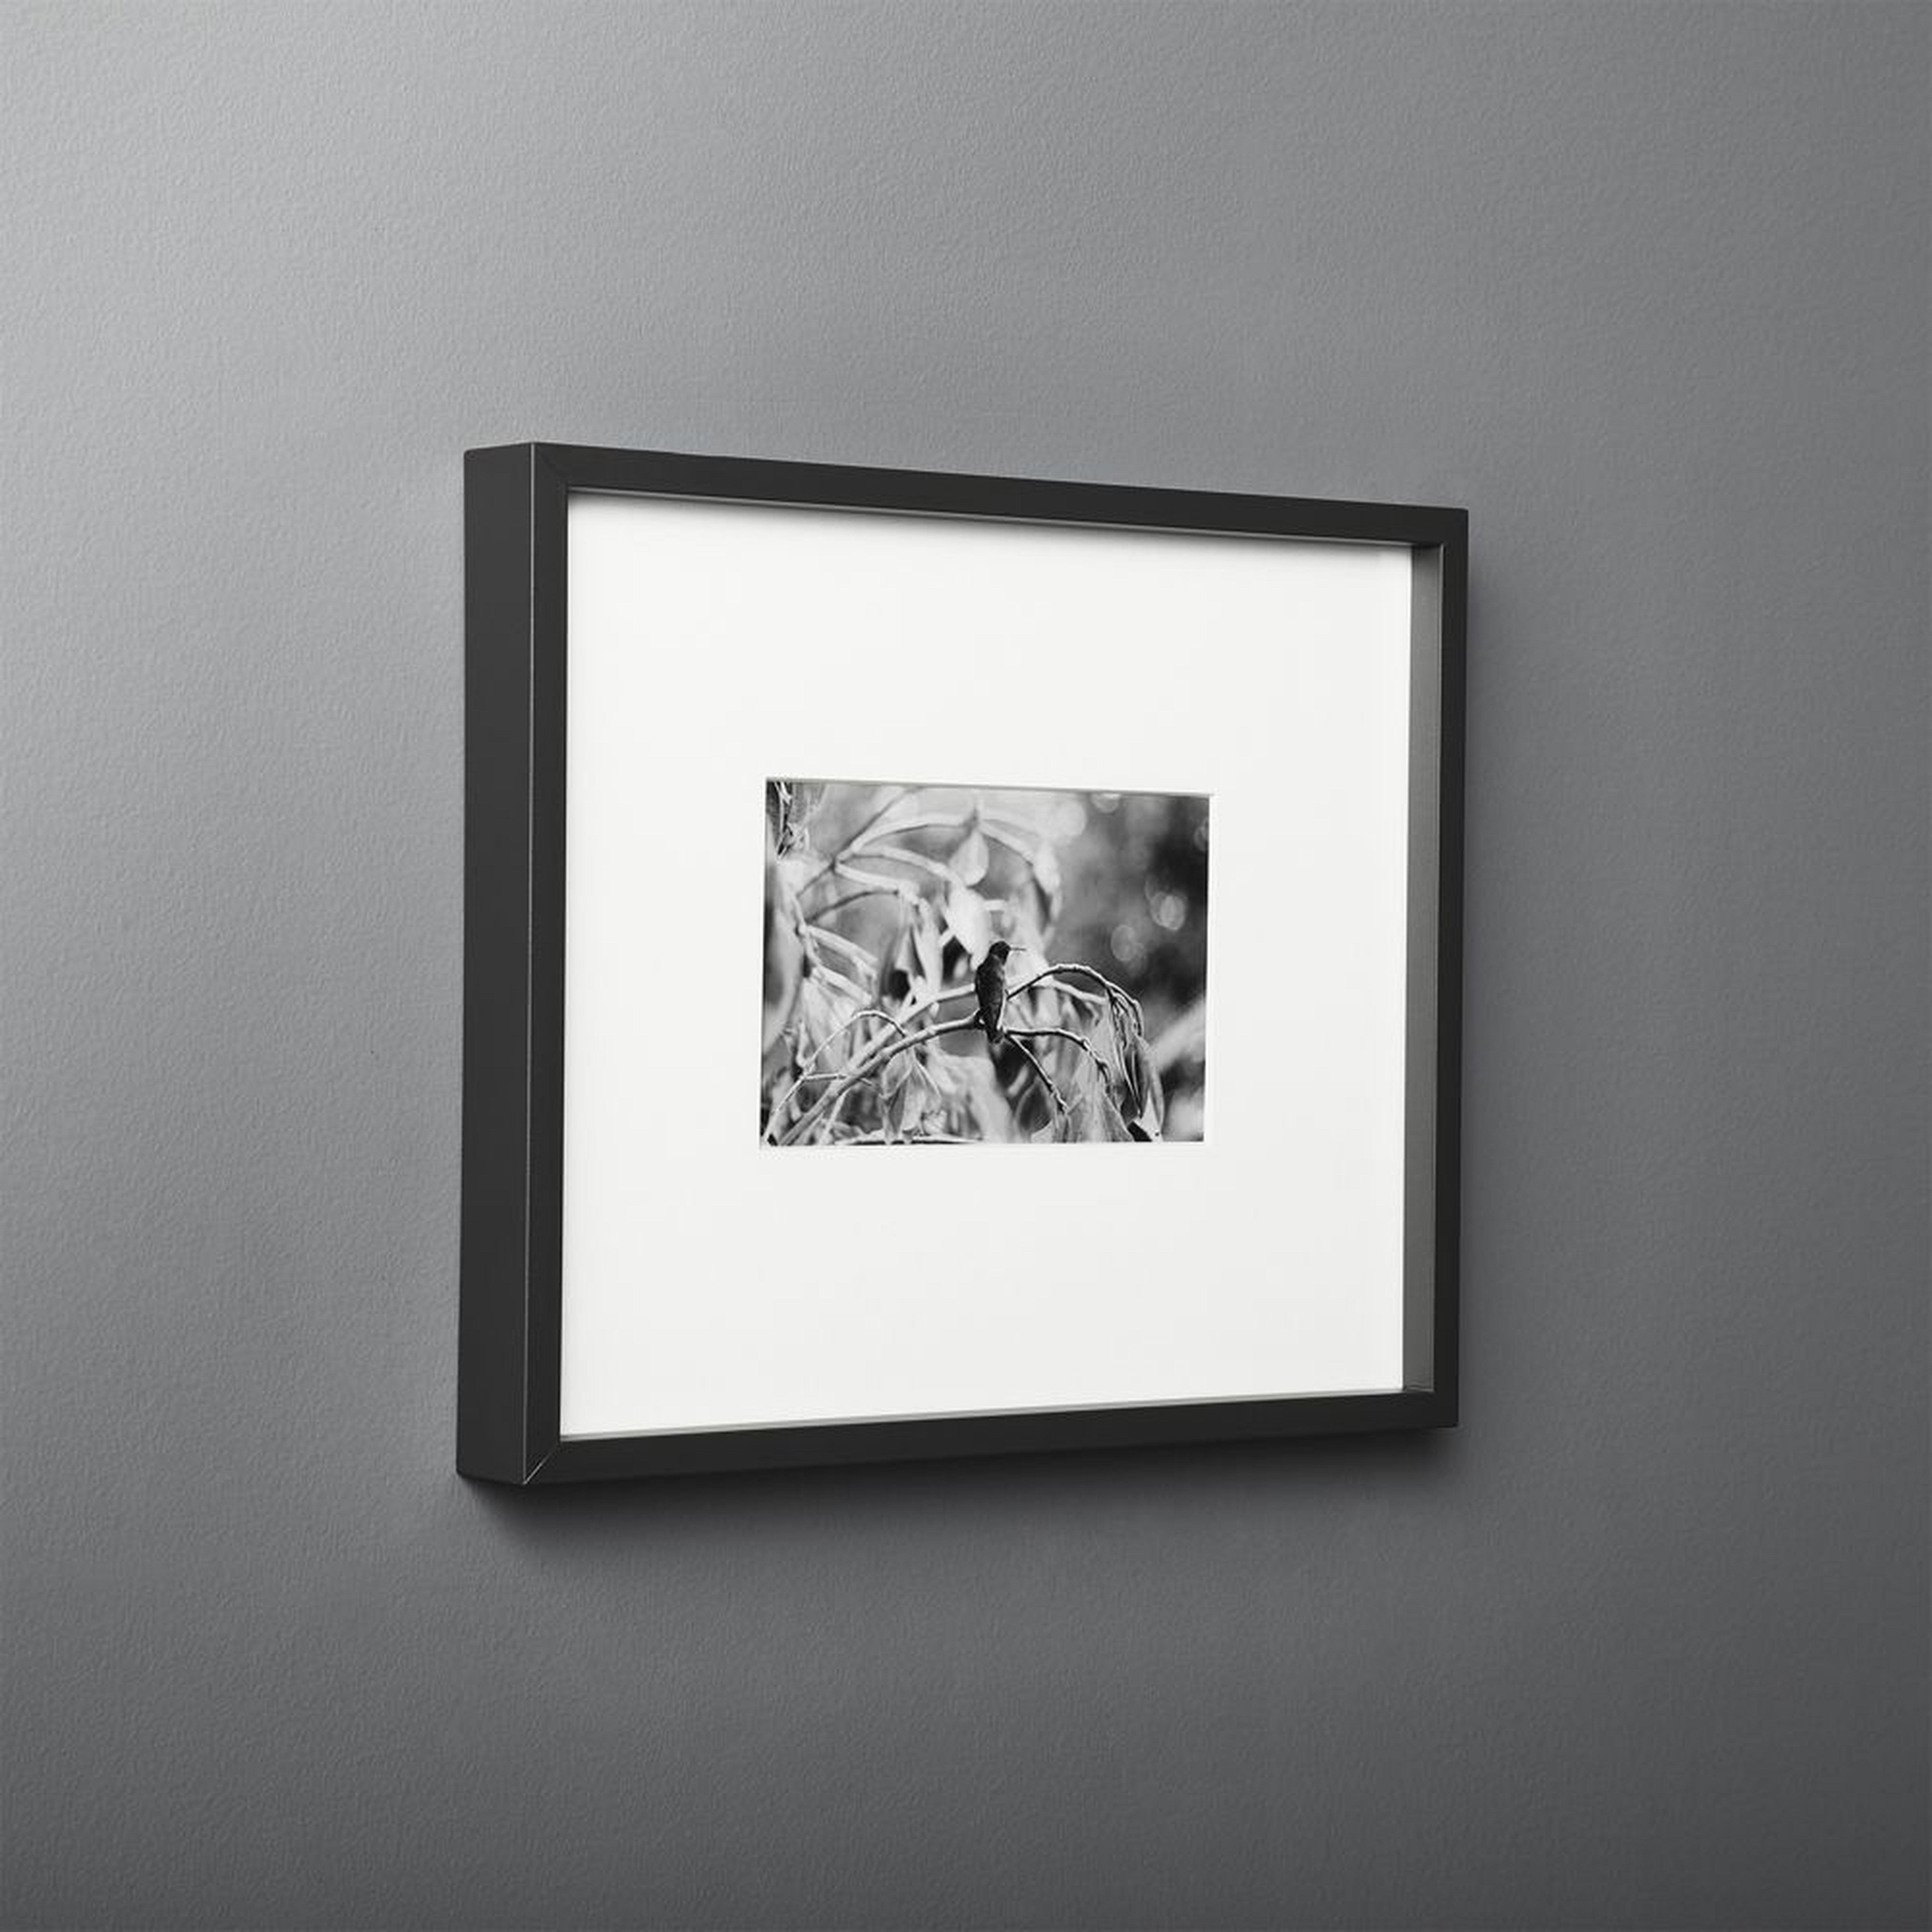 Gallery Black Frame with White Mat 4x6 - CB2